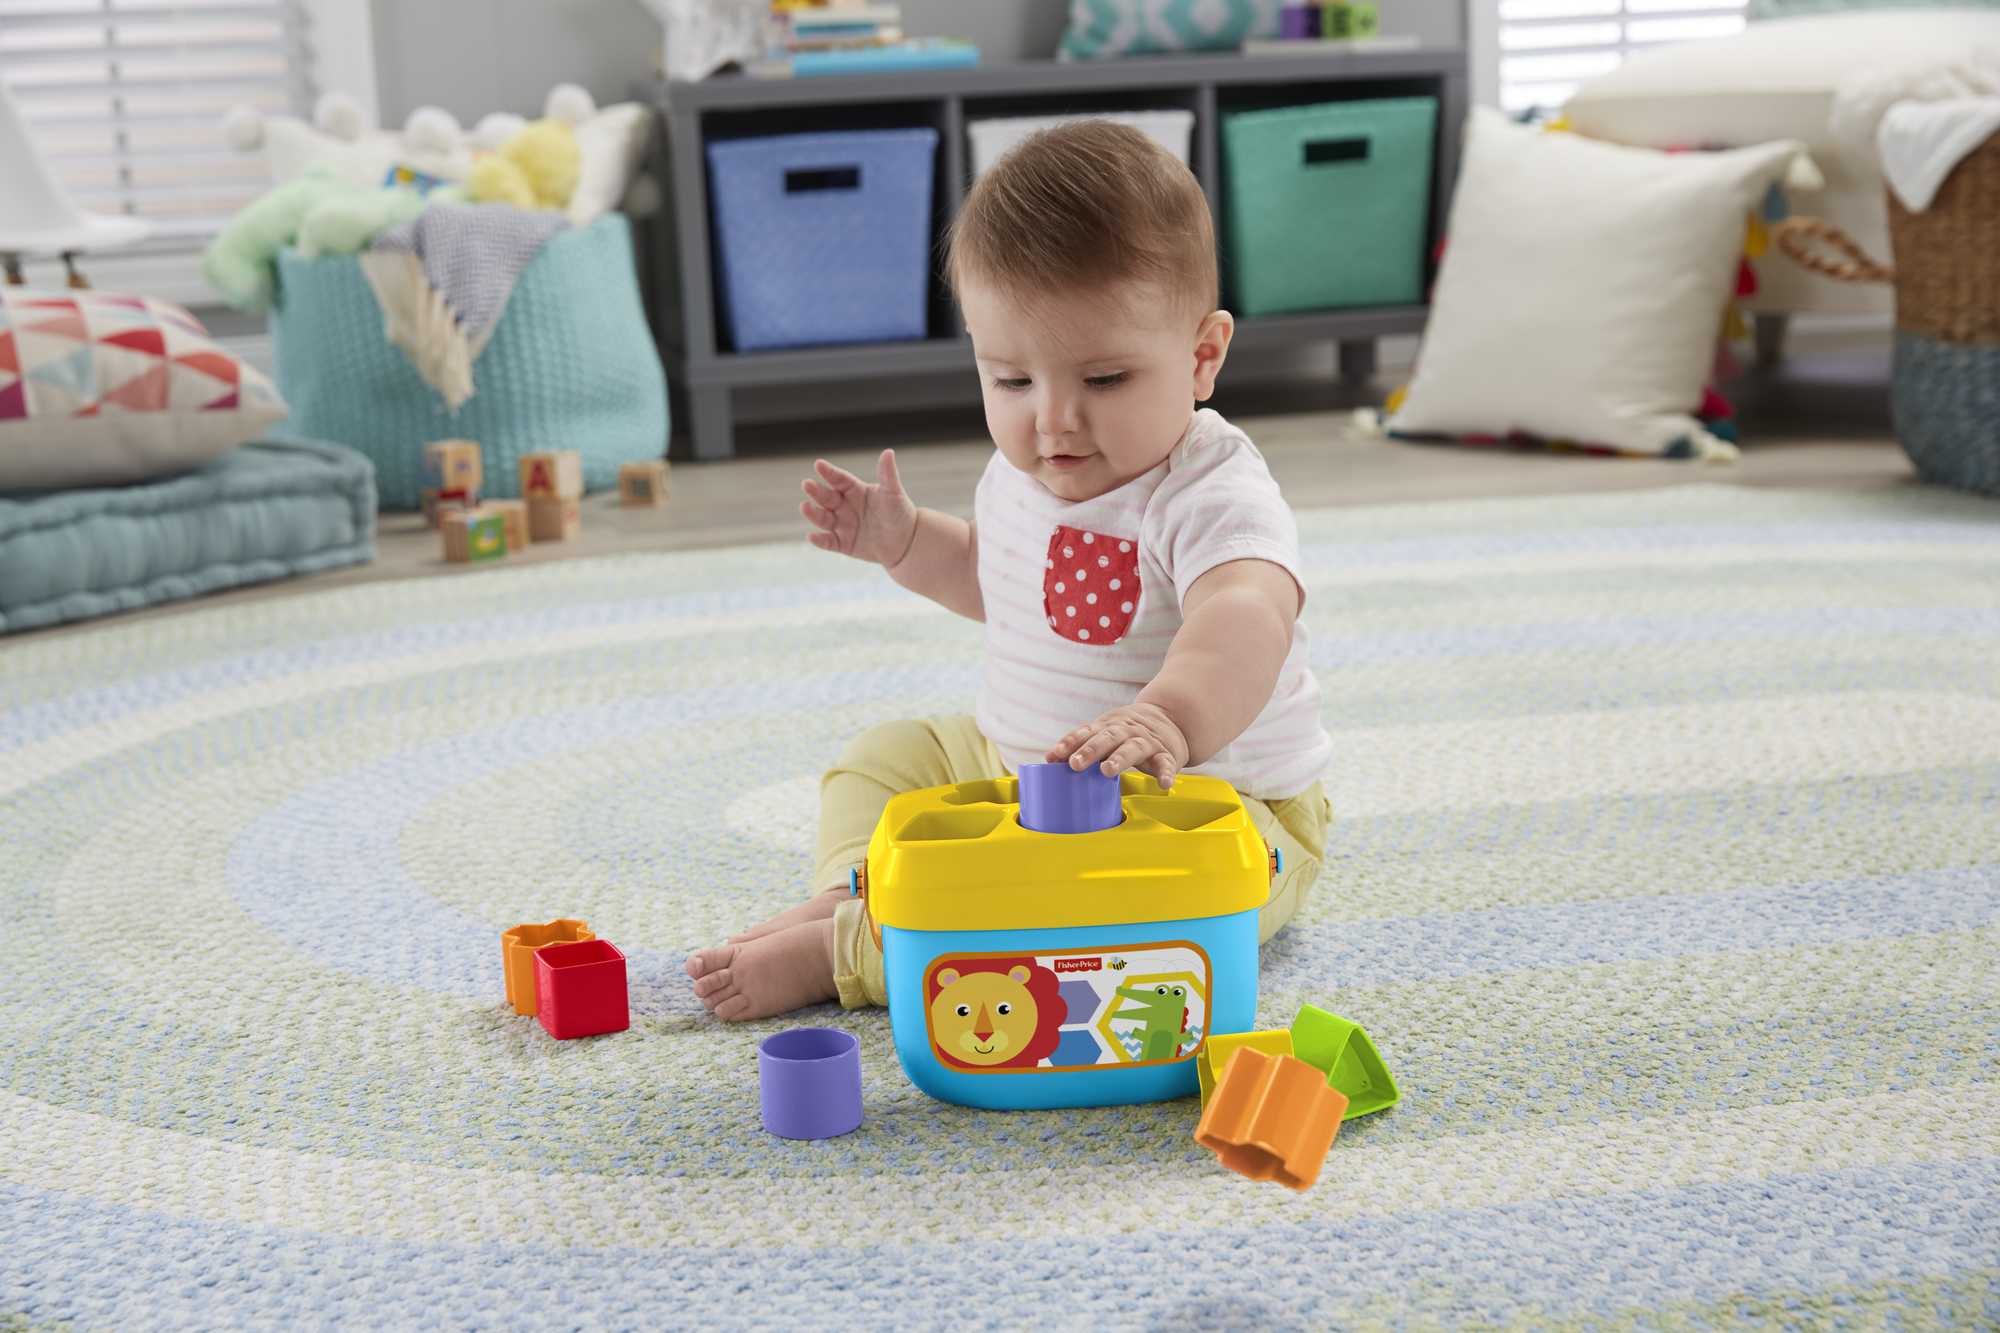 Fisher-Price Baby’s First Blocks Shape Sorting Toy with Storage Bucket, 12 Pieces - image 3 of 7